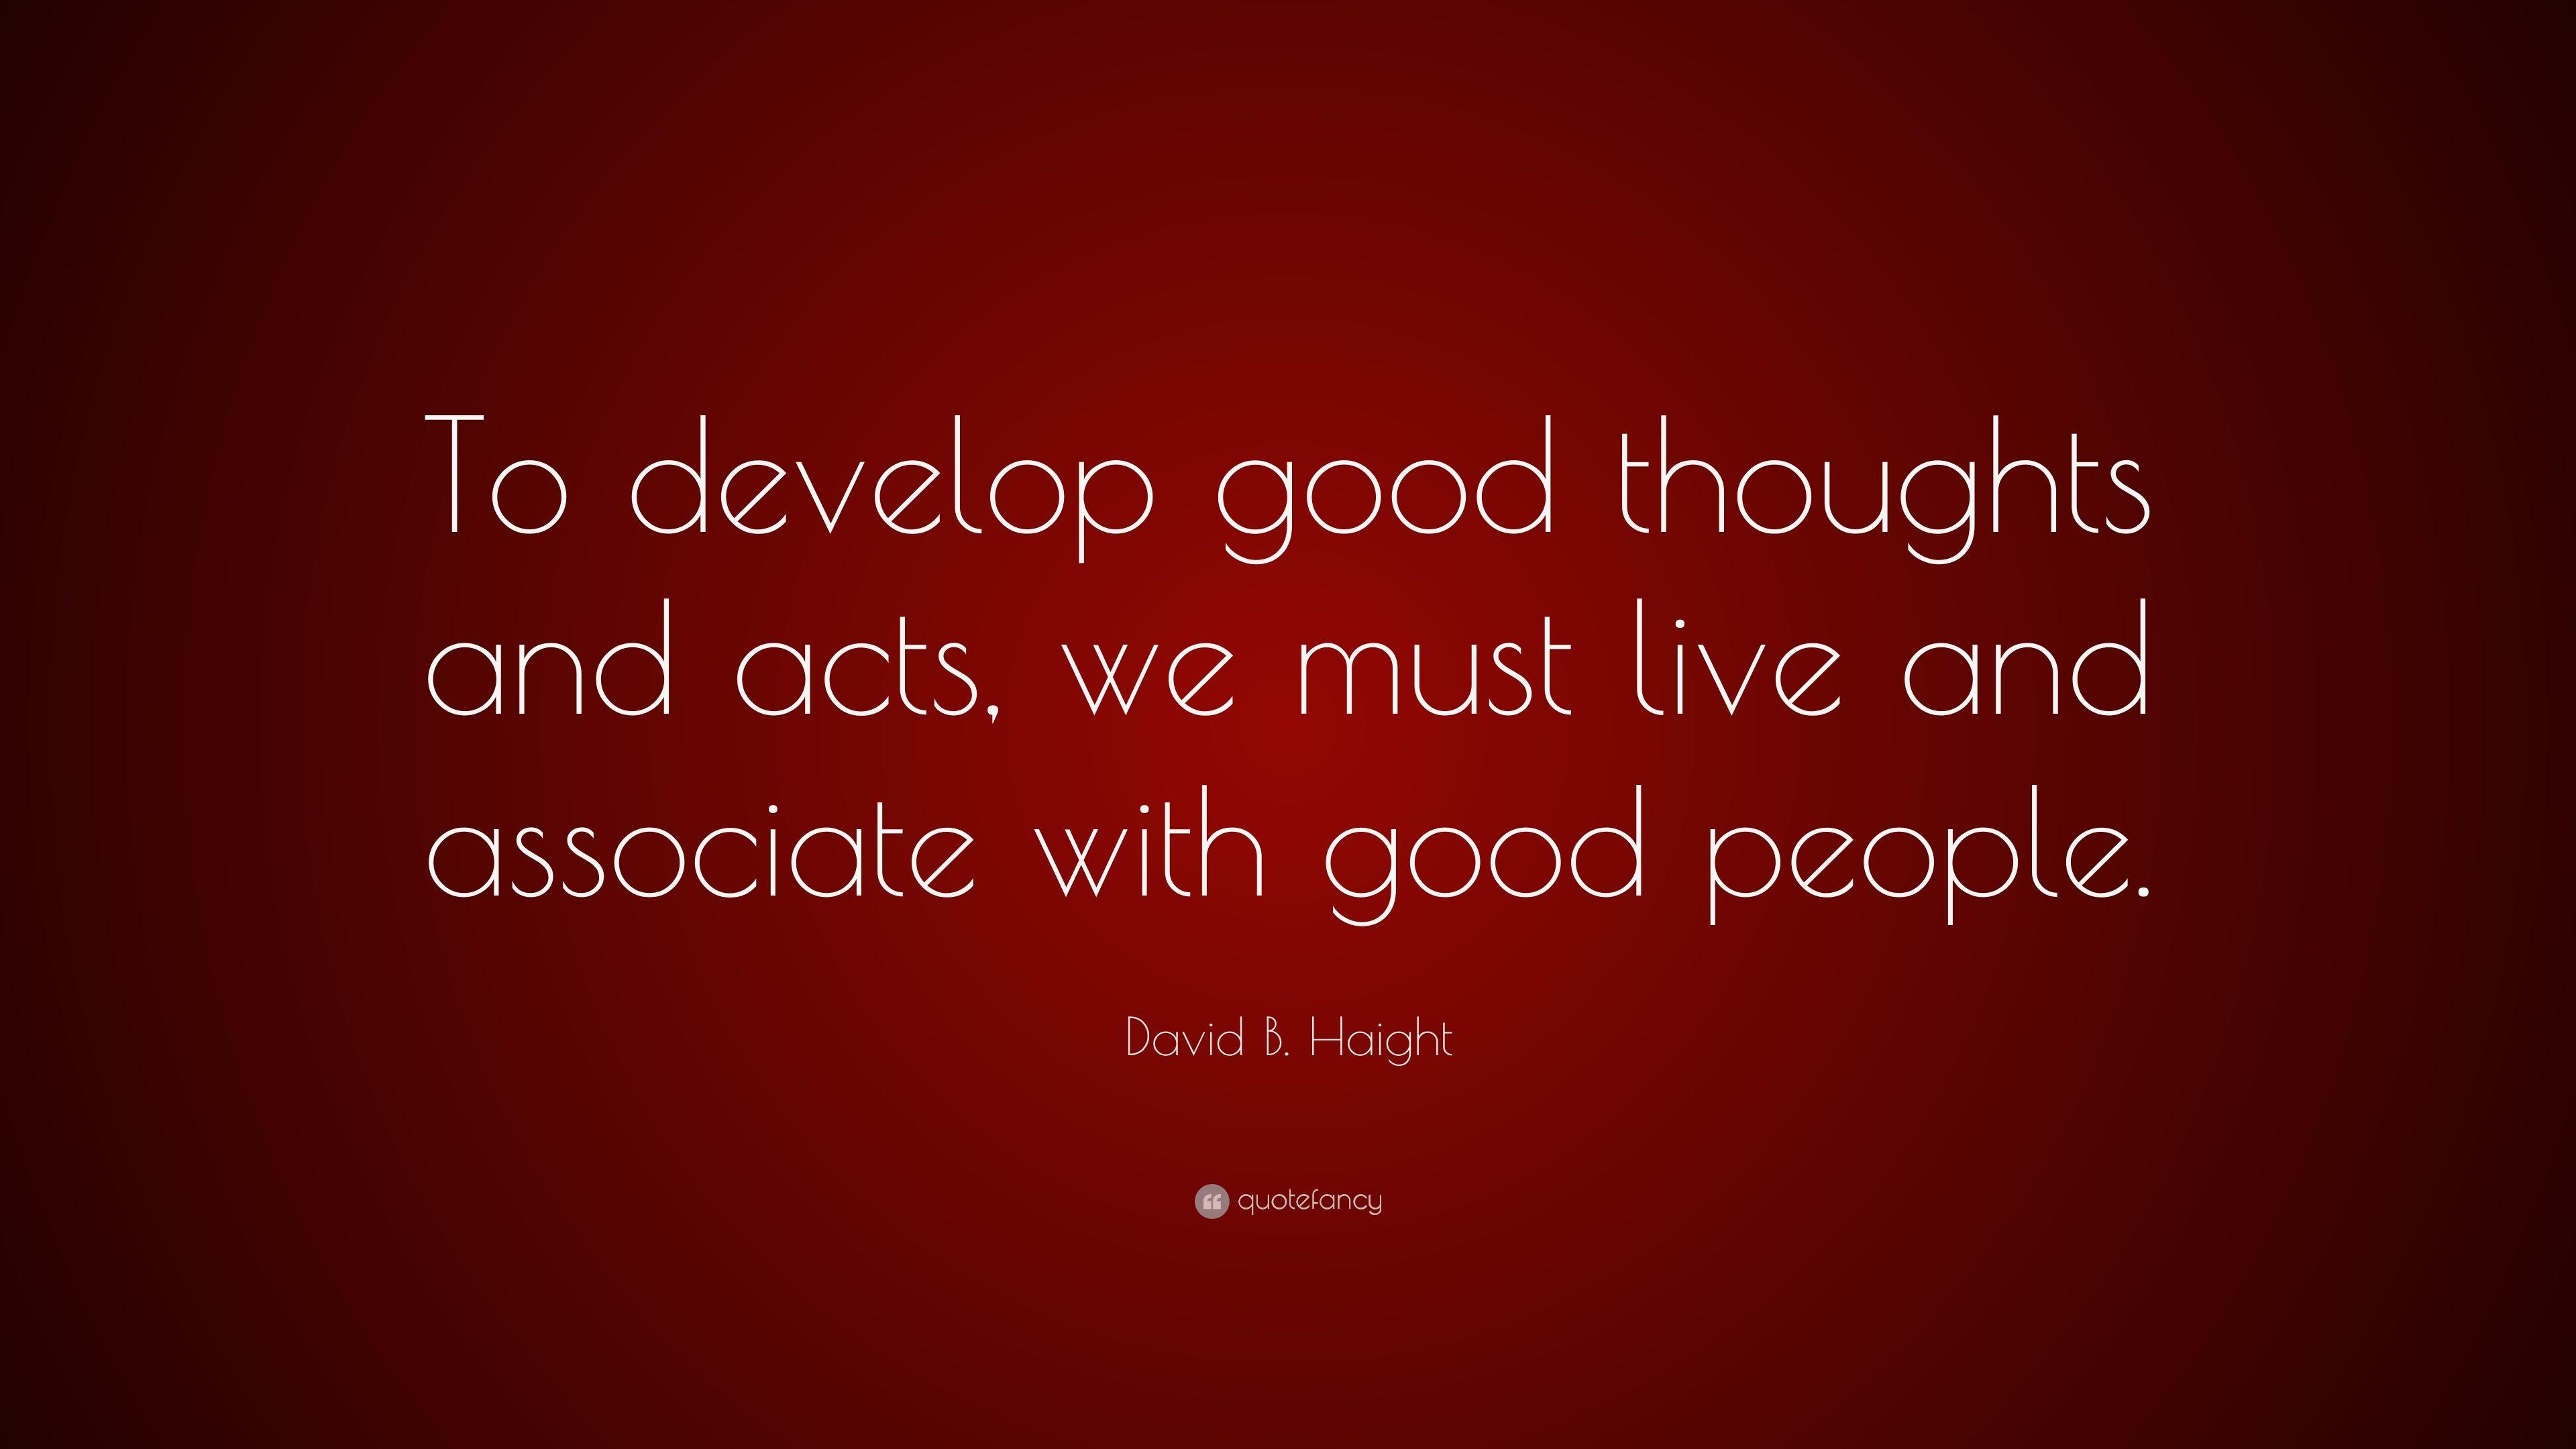 David B. Haight Quote: “To develop good thoughts and acts, we must